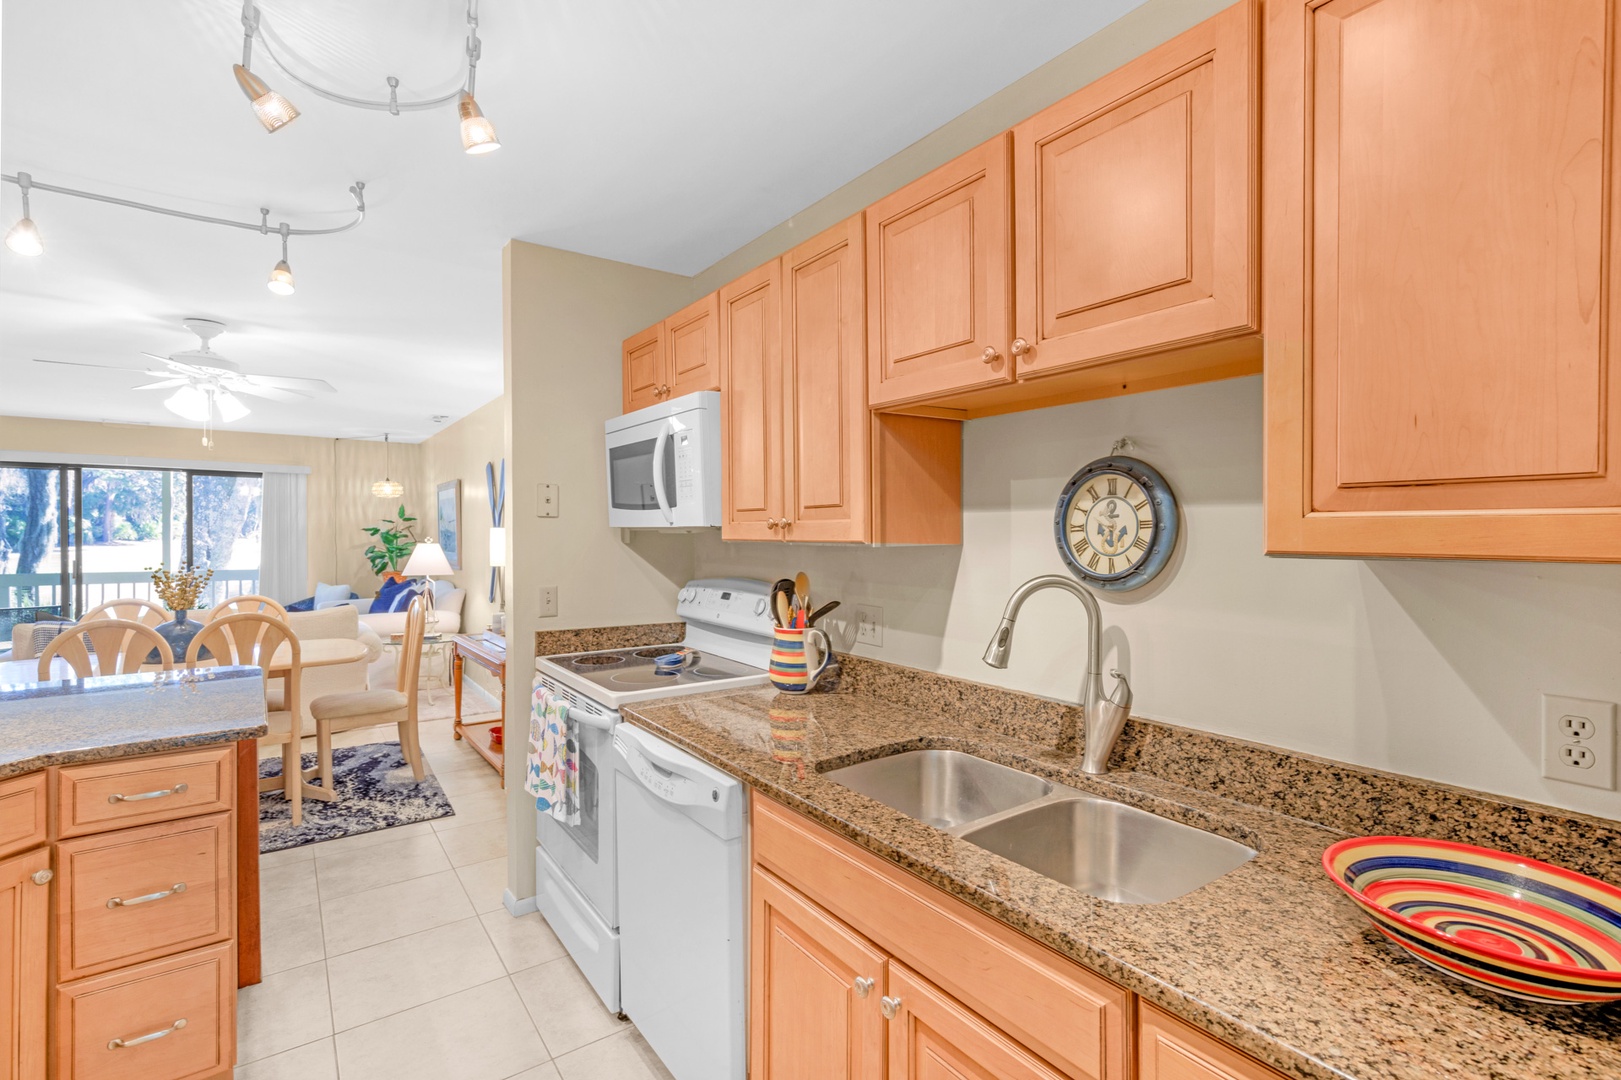 This quaint kitchen offers ample storage space & all the comforts of home